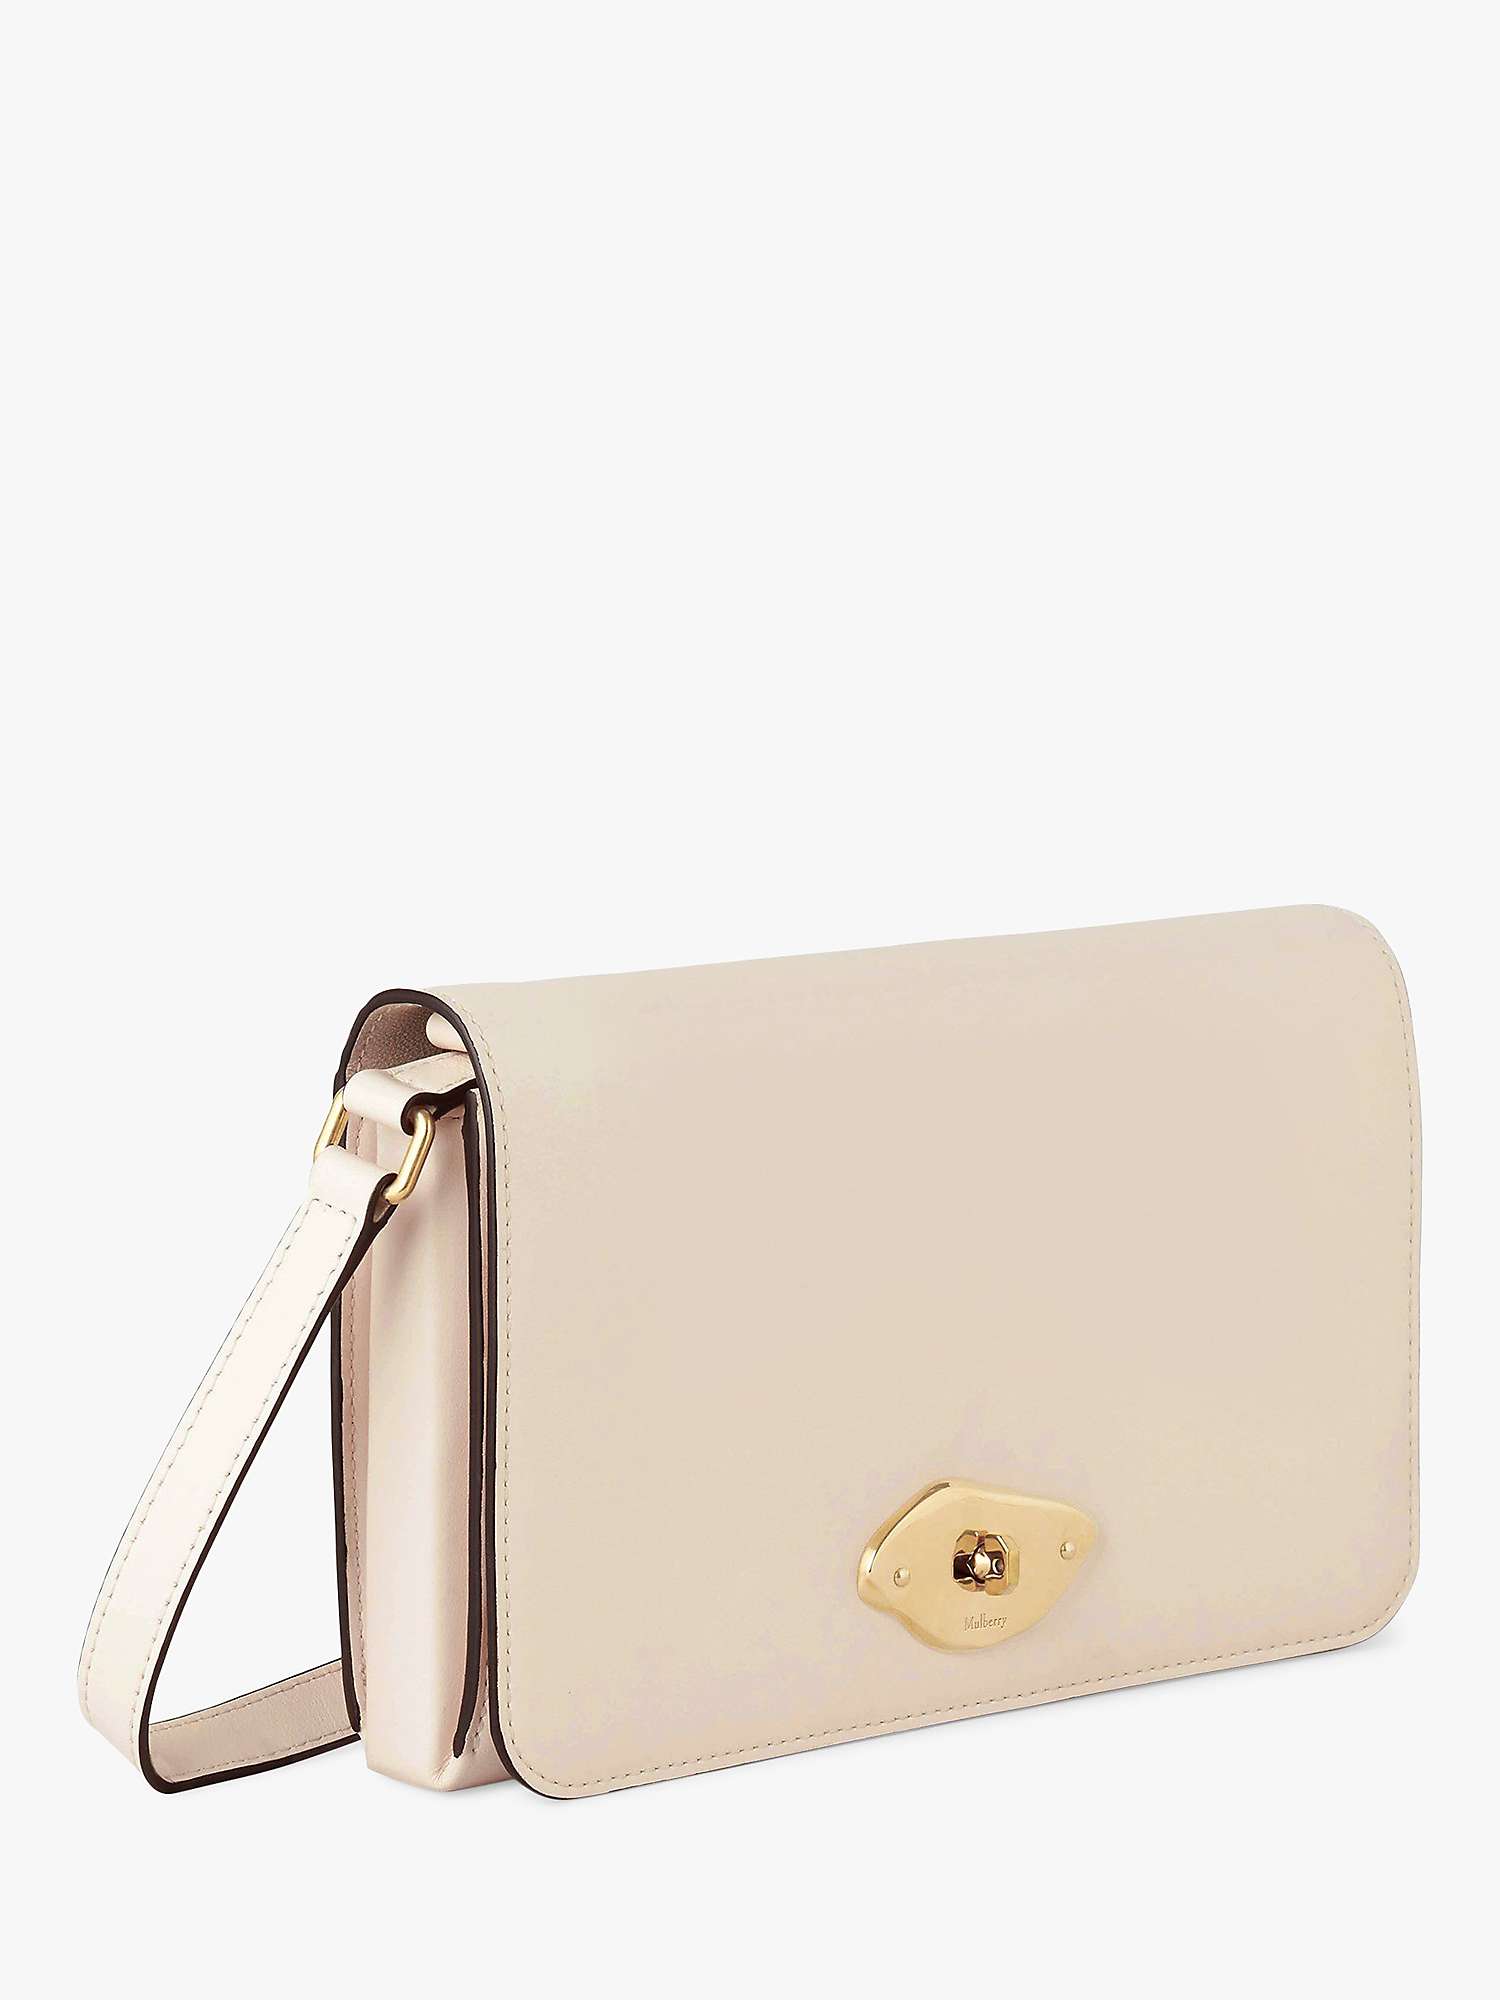 Buy Mulberry Lana Gloss Leather Wallet on a Strap Online at johnlewis.com